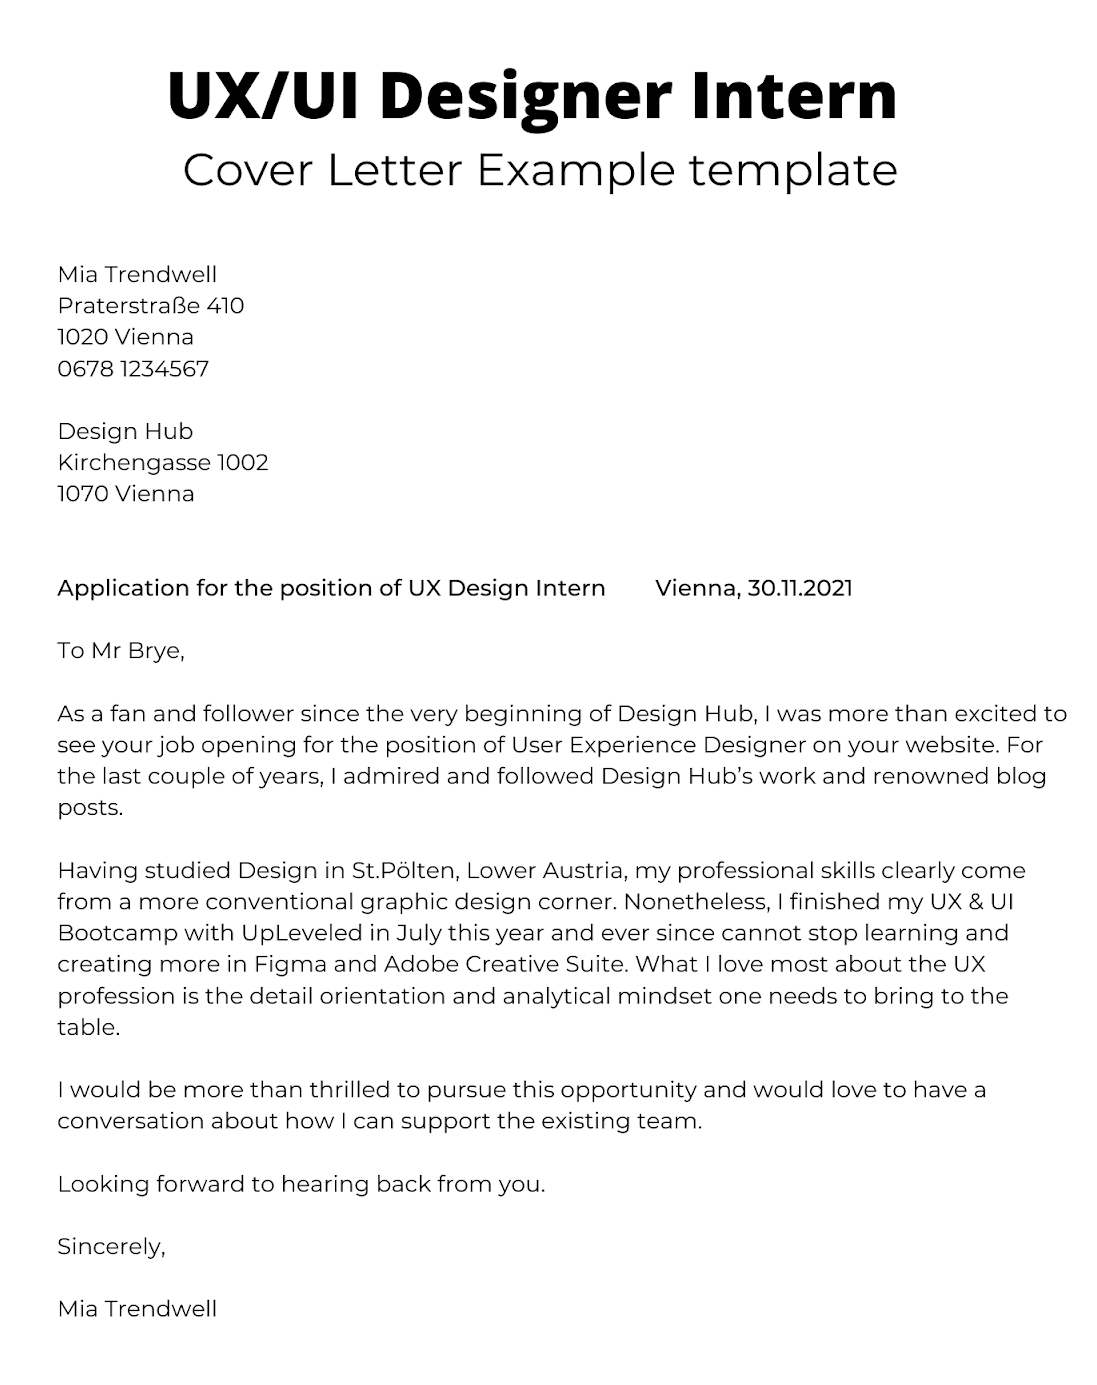   Example cover letter for a design internship